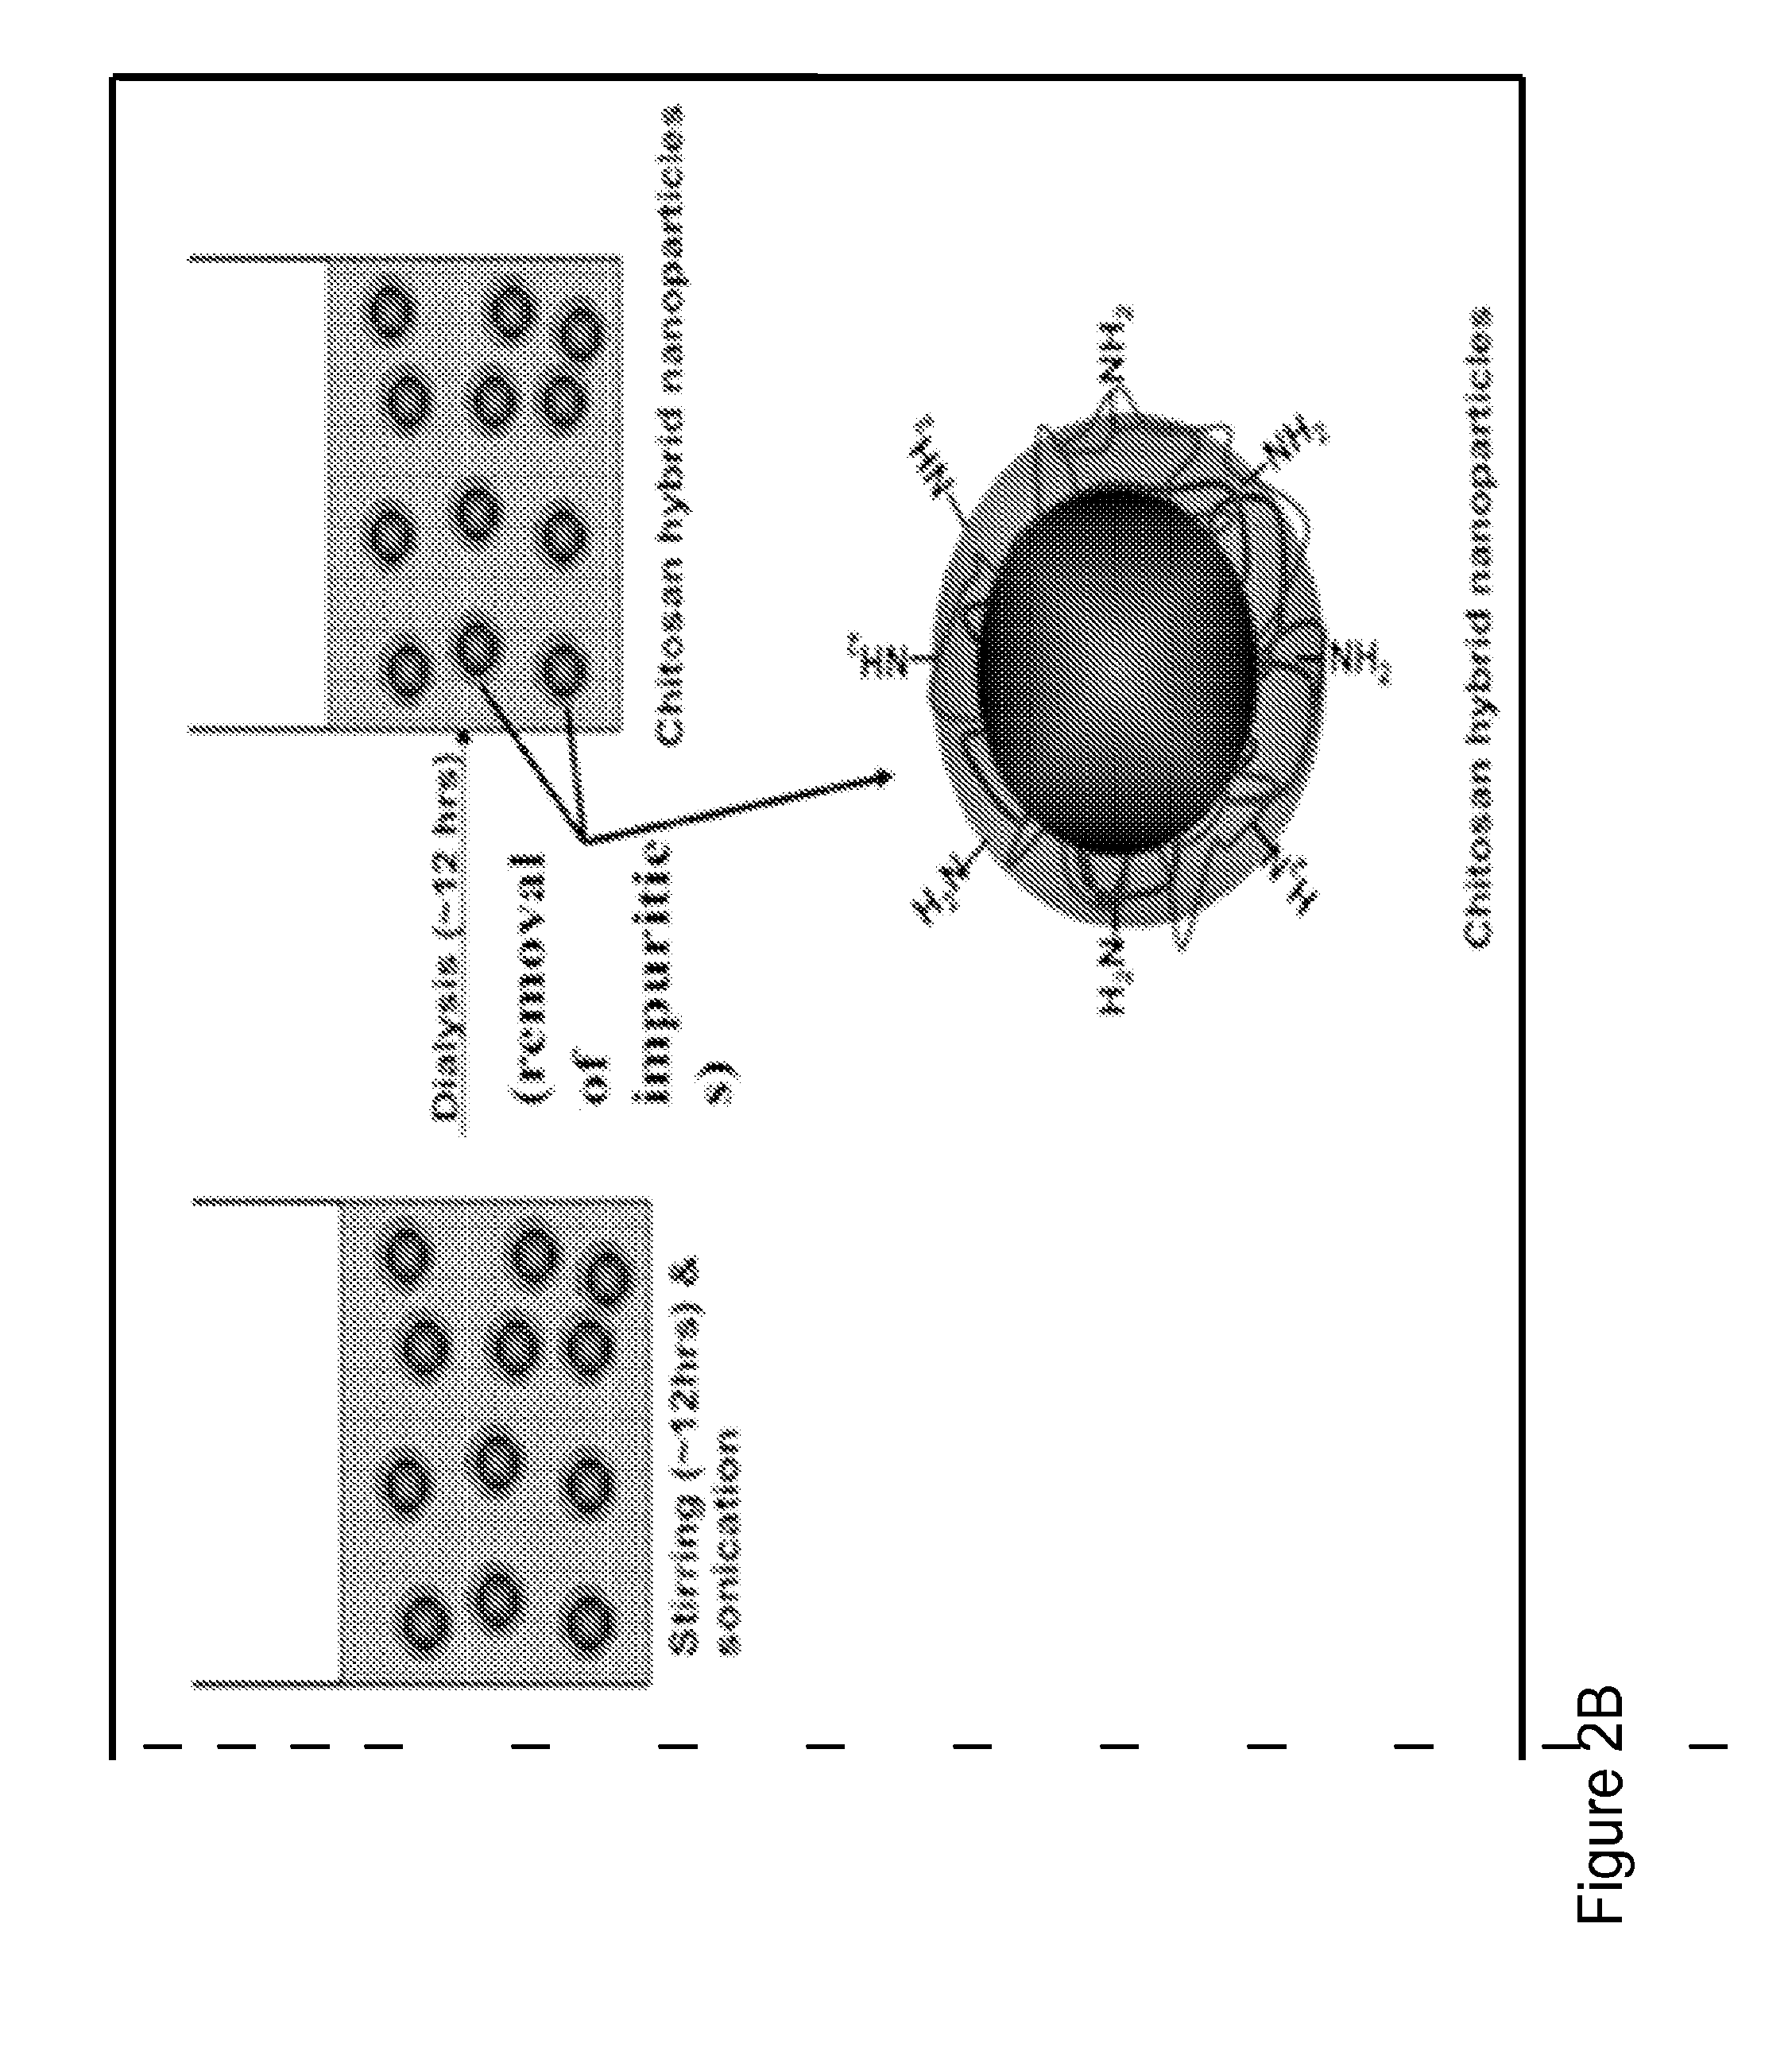 Novel hemostatic patch and uses thereof